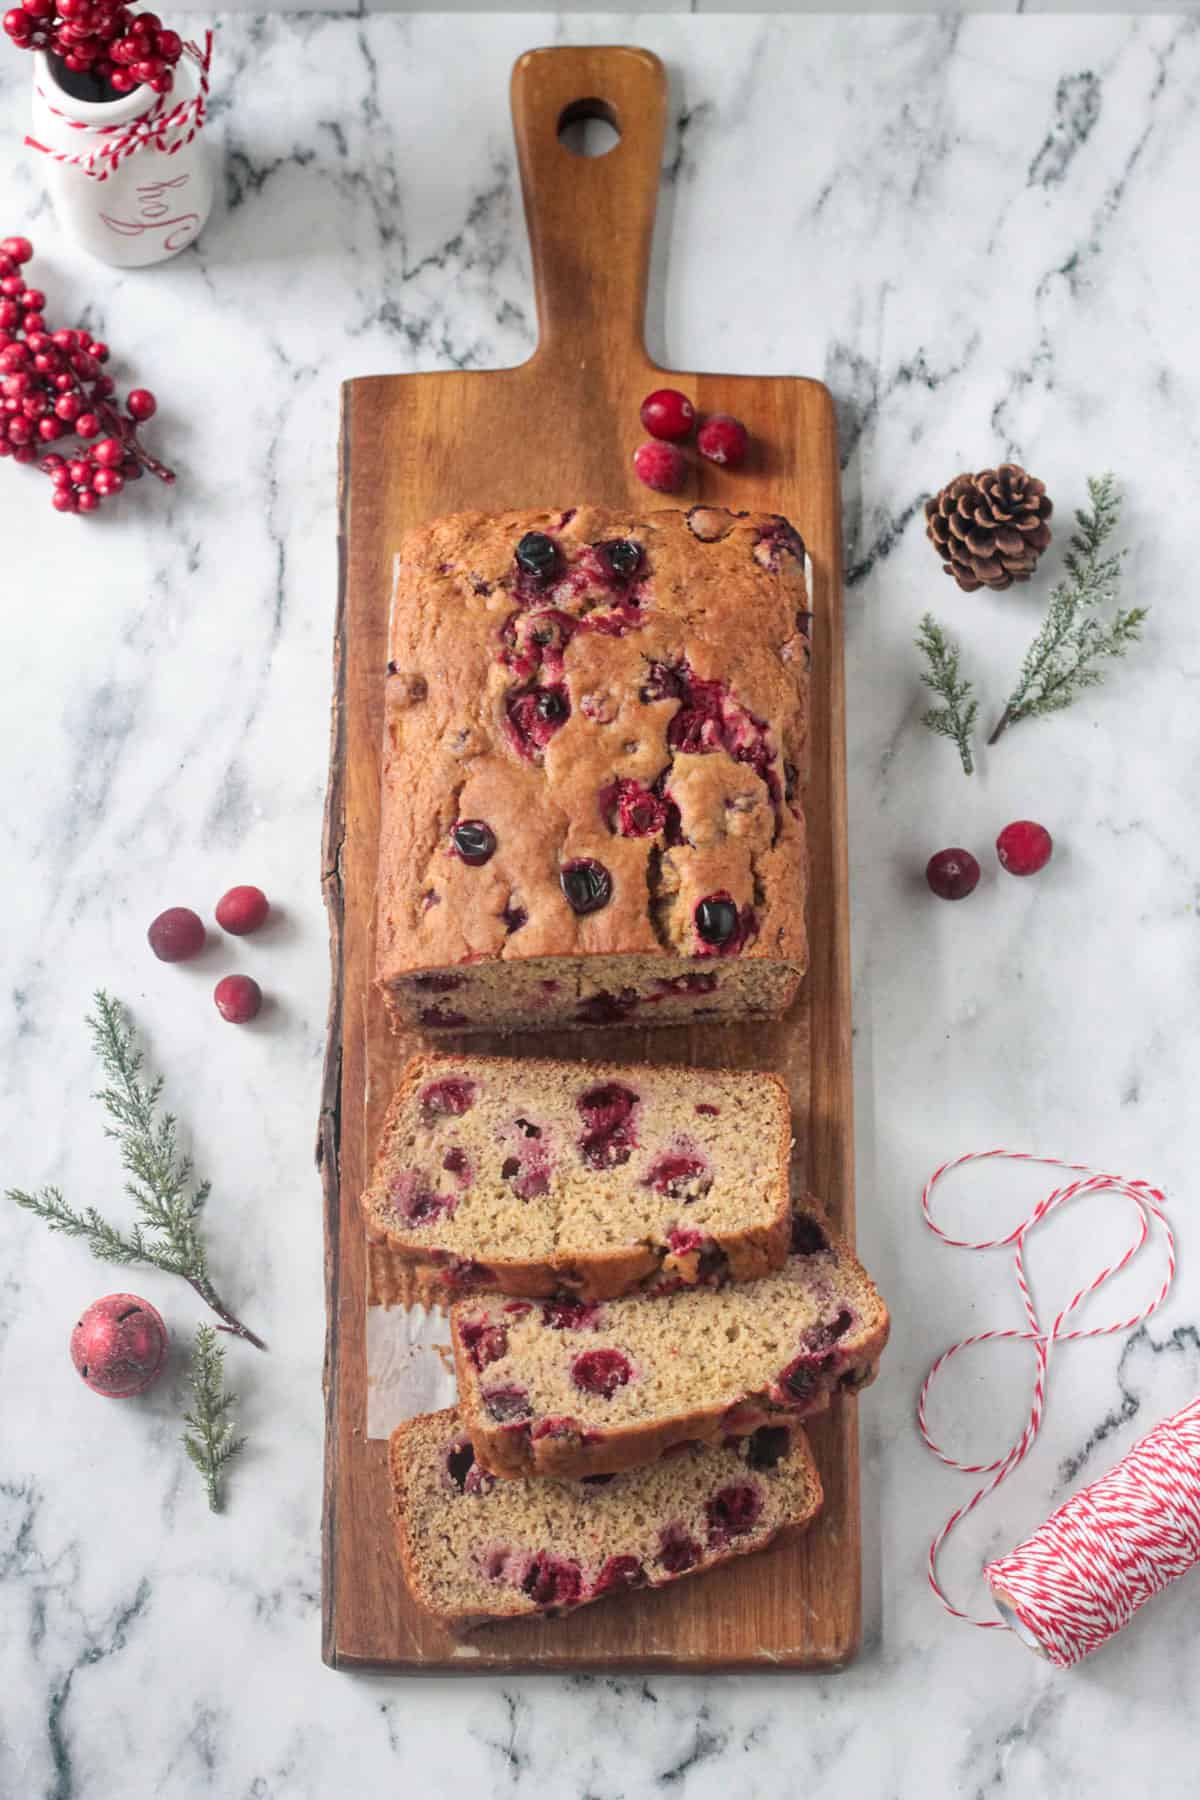 Loaf of cranberry banana bread on a wooden serving board